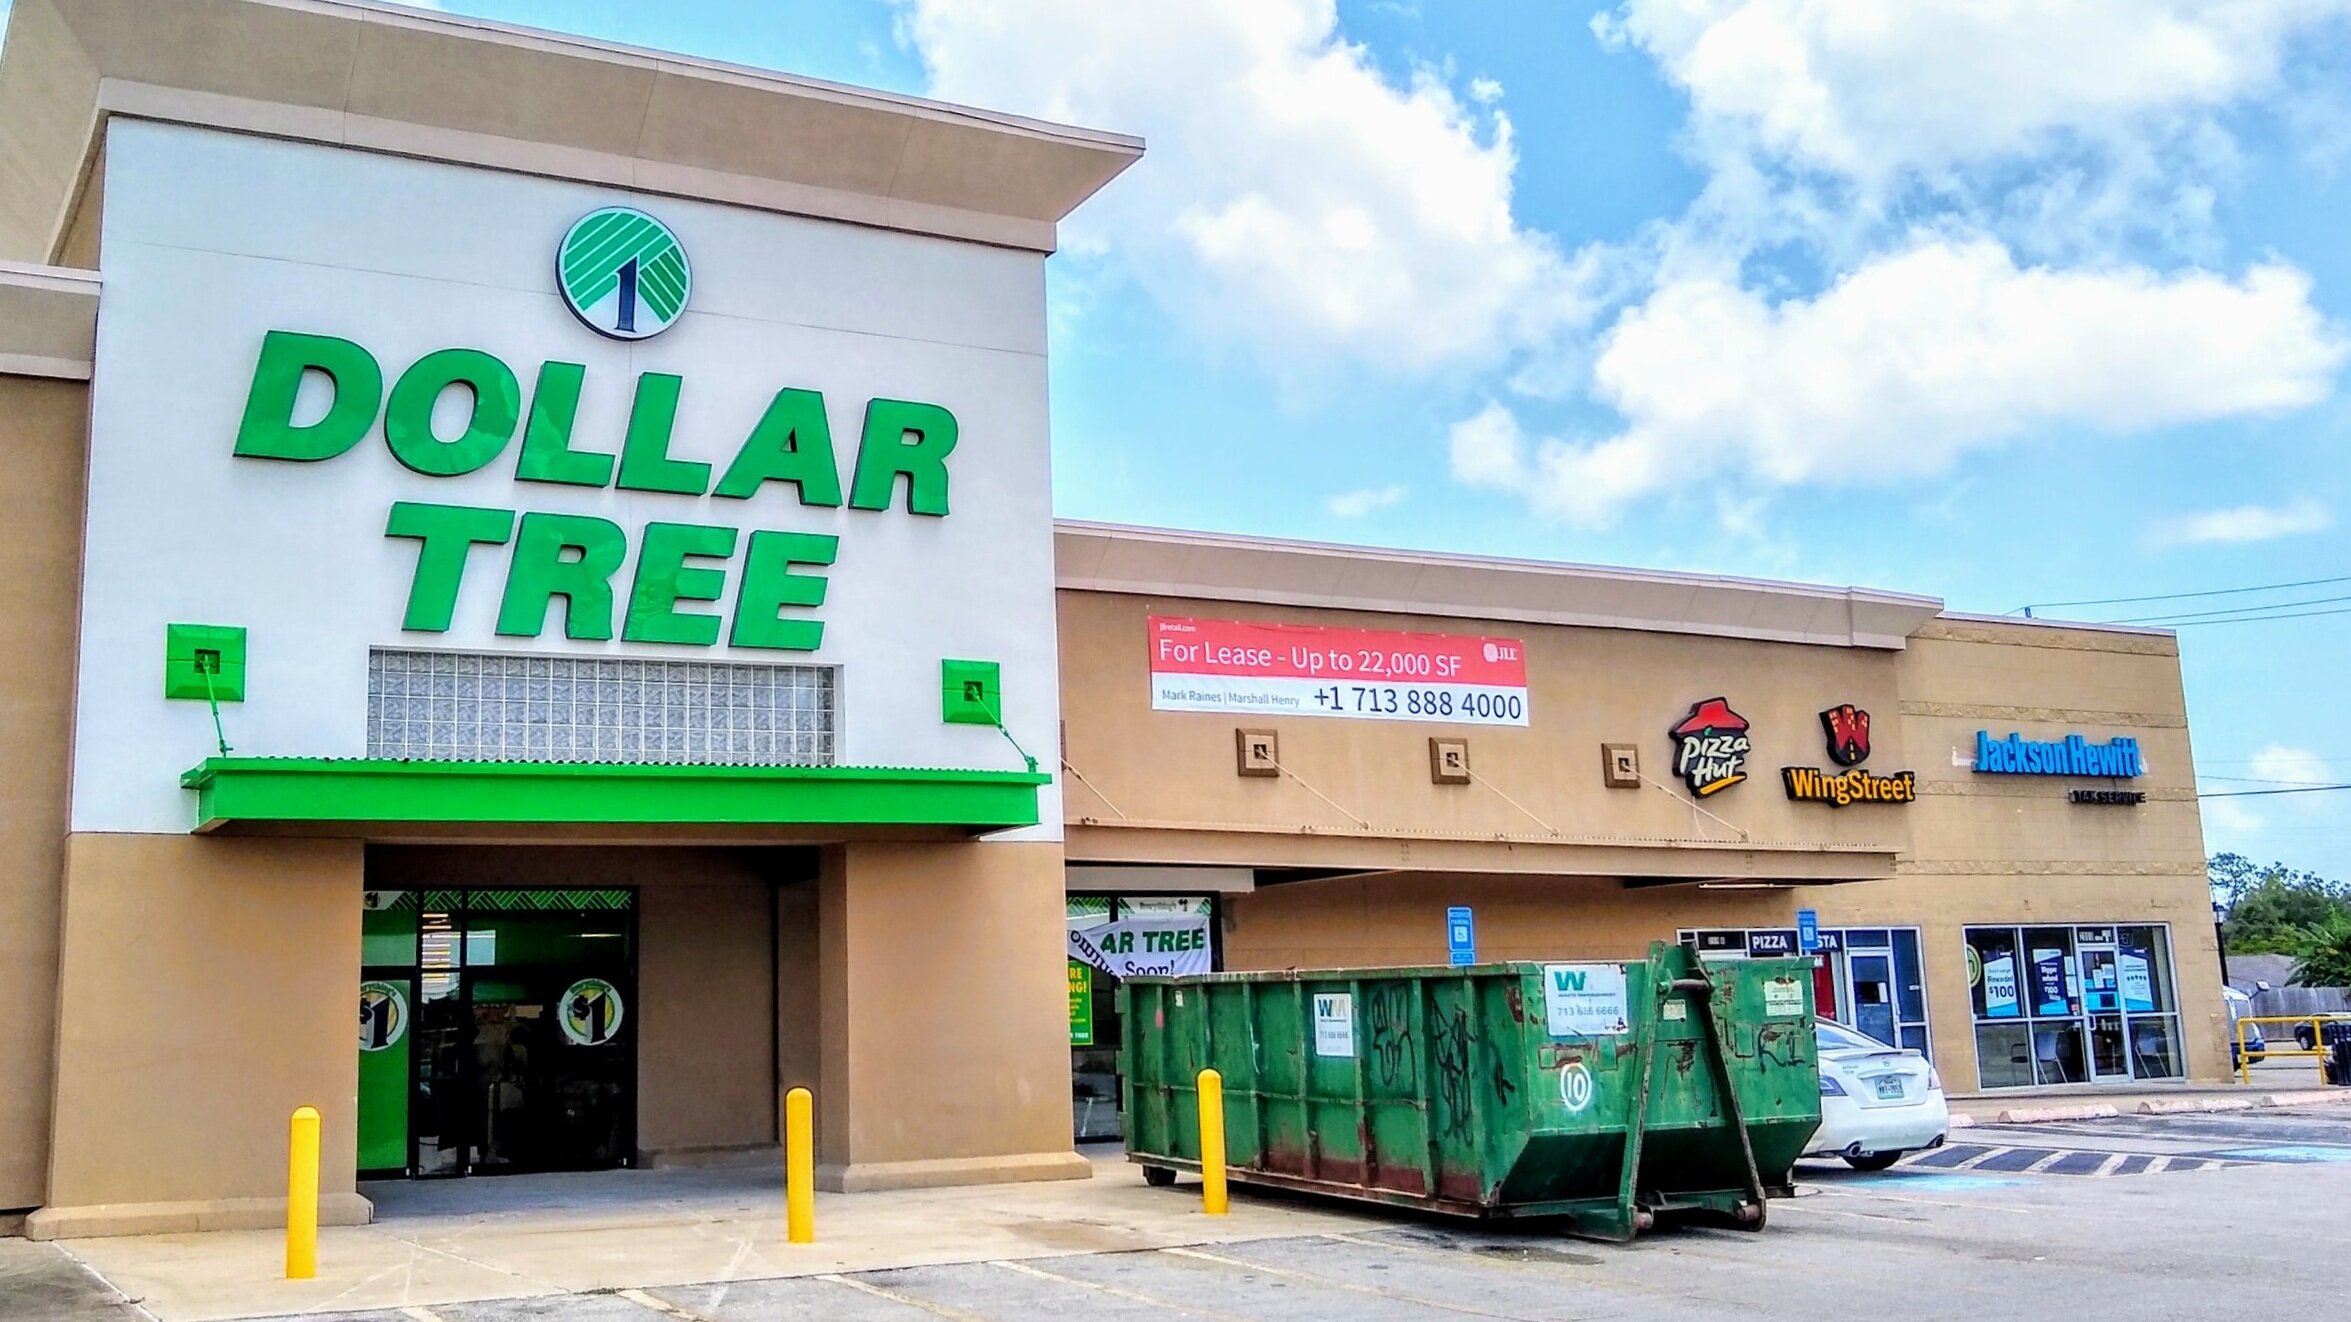 Dollar Tree Coming Soon! — SH 146 Expansion Project